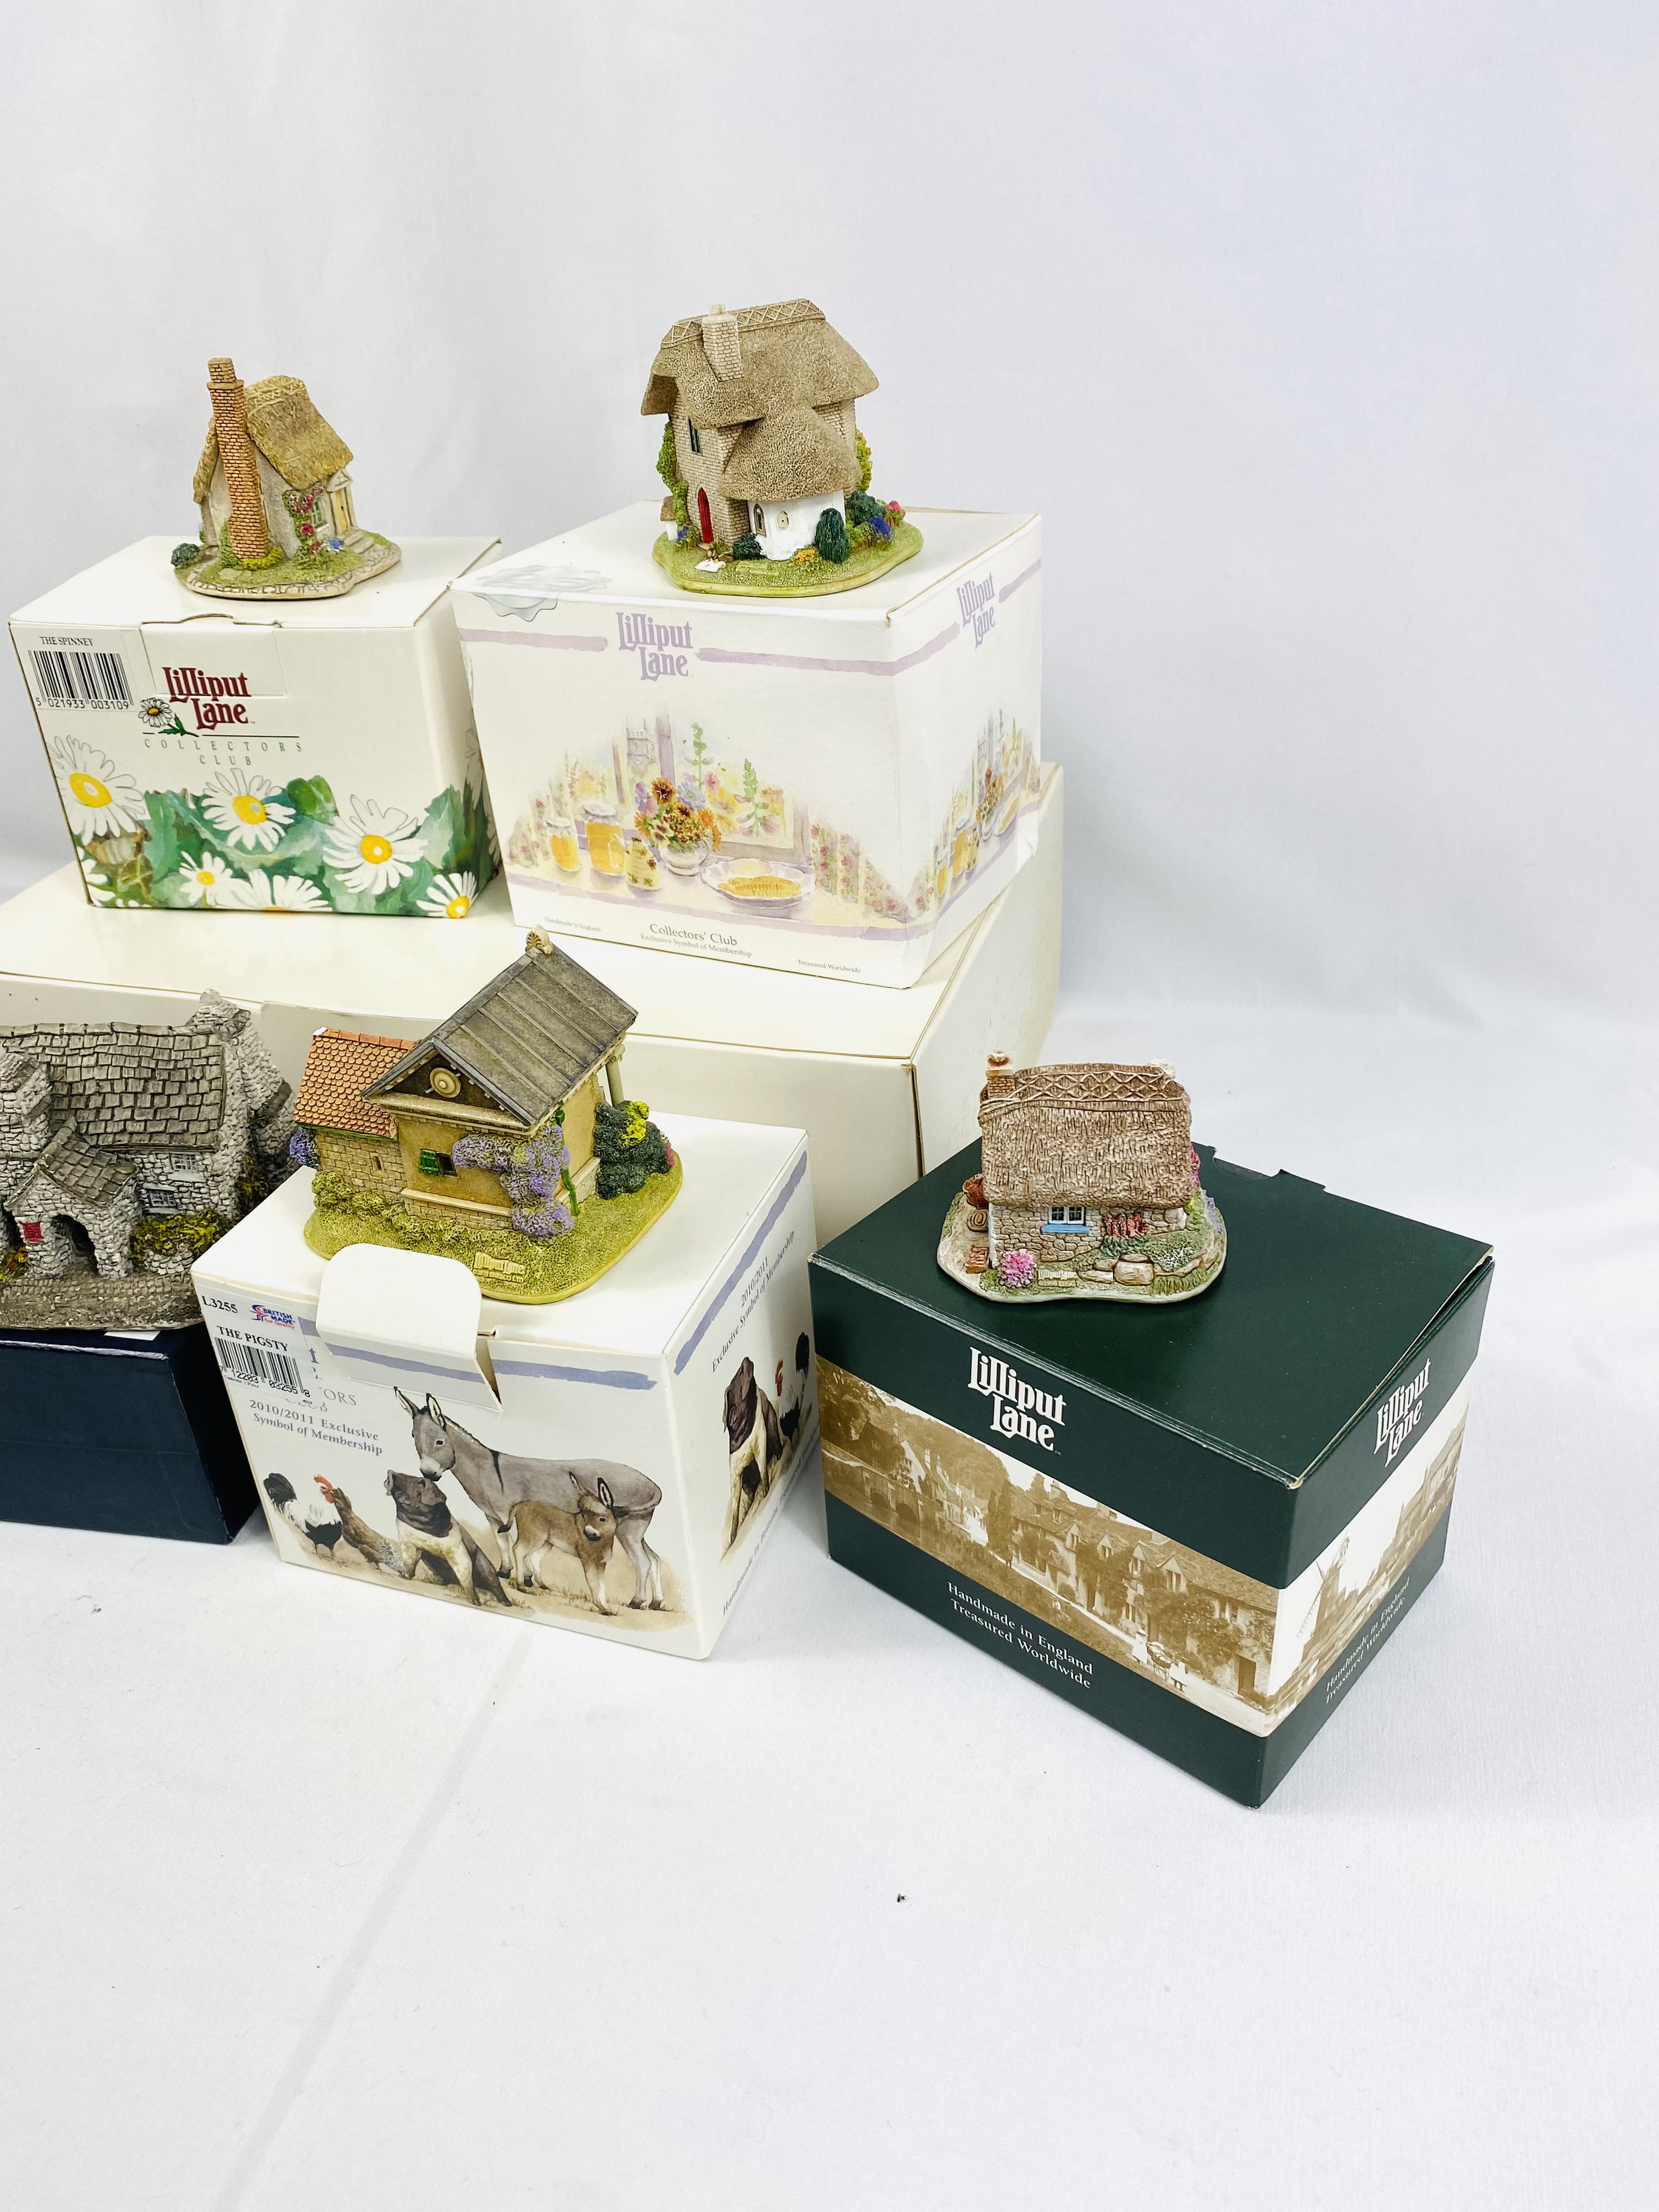 Six Lilliput Lane Cottages in boxes - Image 3 of 4